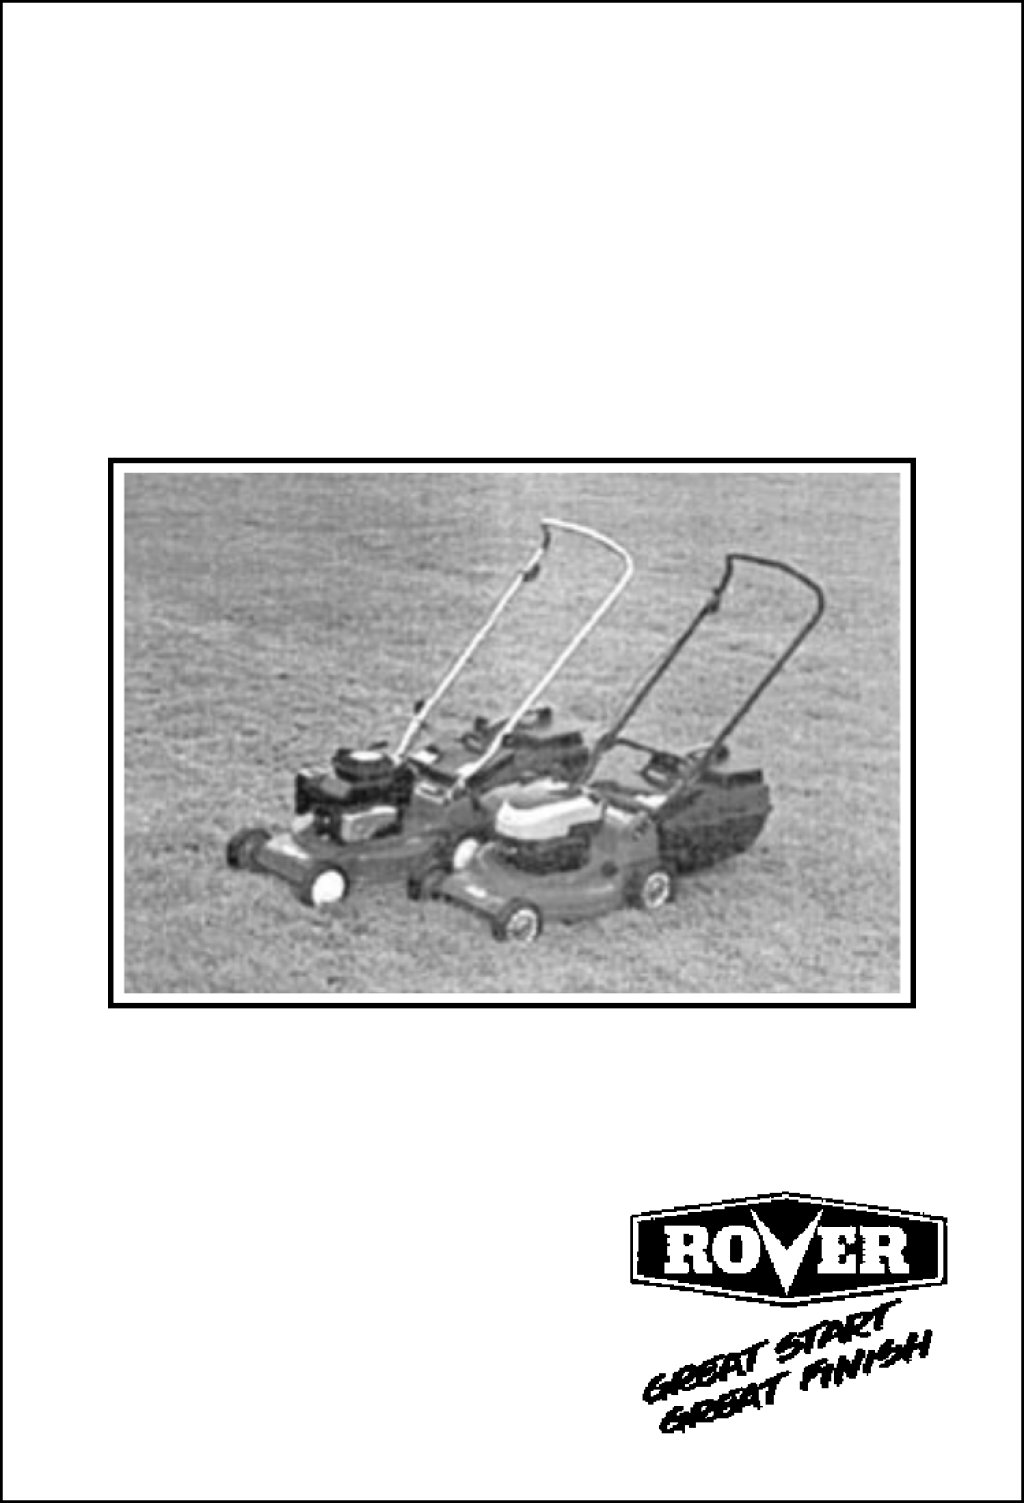 Picture of: Rover Craftsman Lawn Mower on Sale – anuariocidob